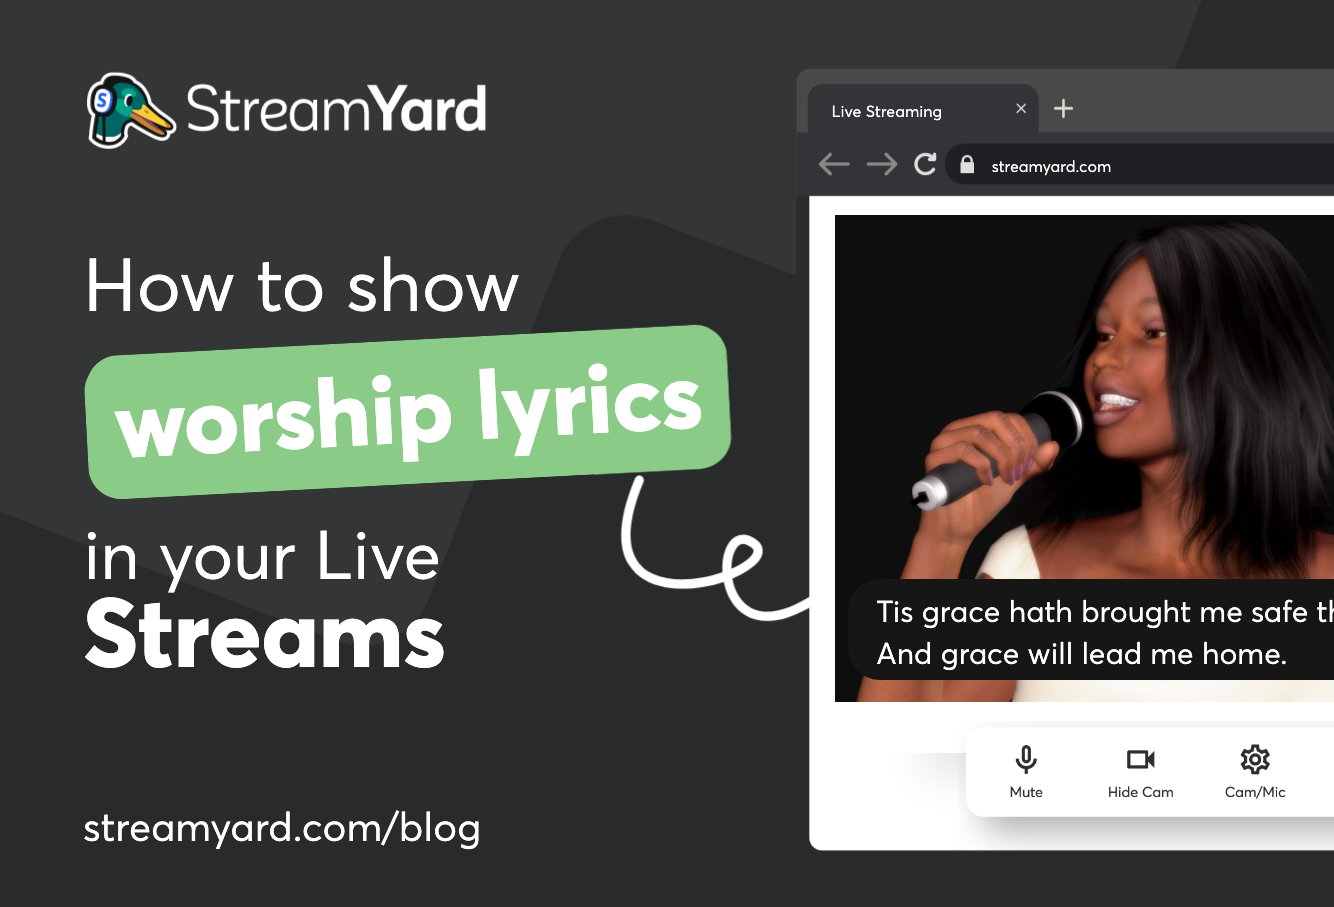 How to Show Worship Lyrics in your Church Live Streams